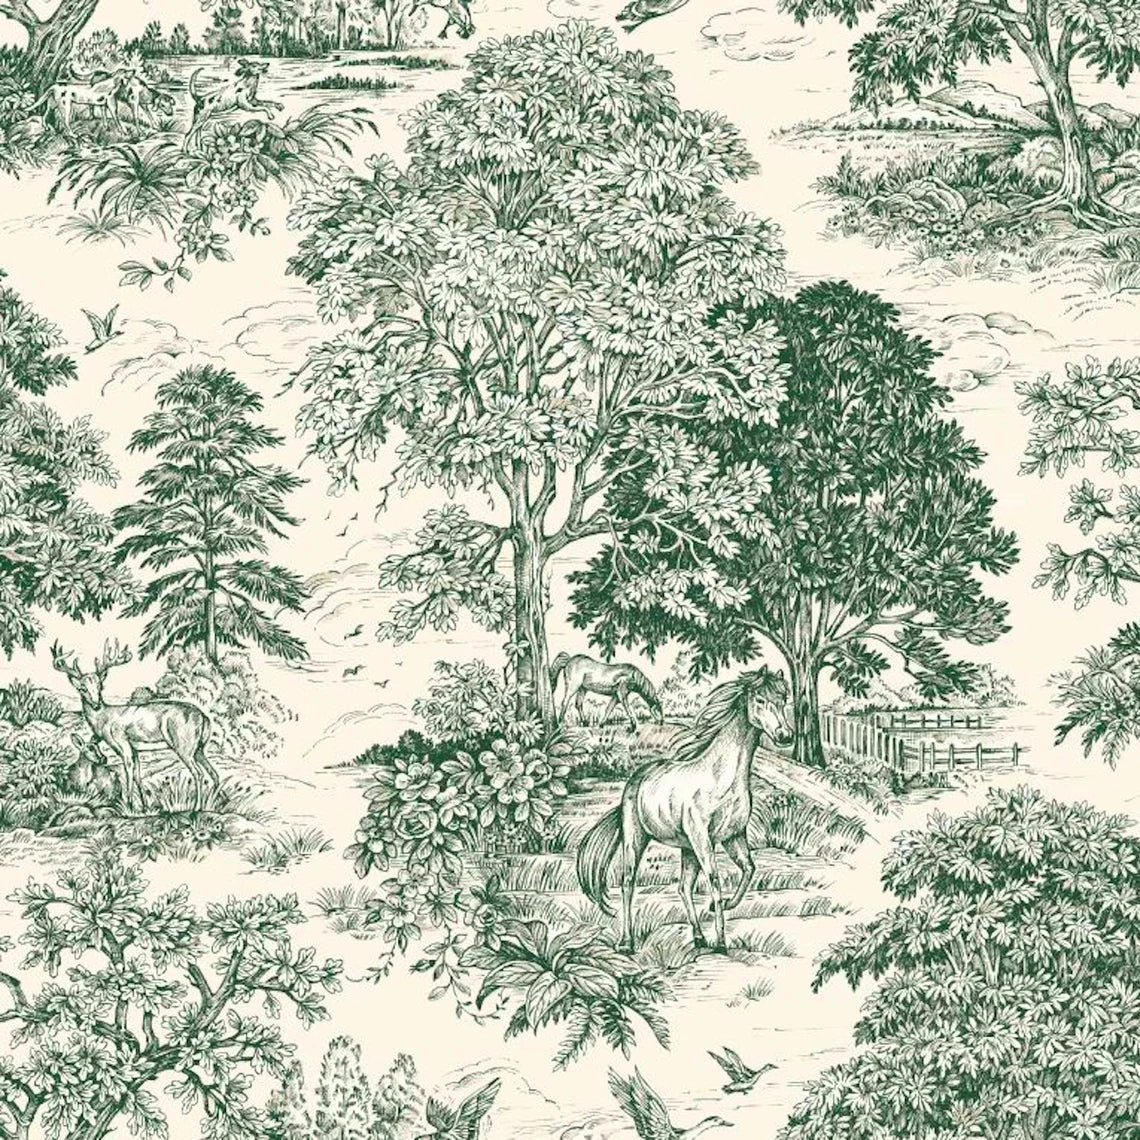 shower curtain in Yellowstone Classic Green Country Toile- Horses, Deer, Dogs- Large Scale